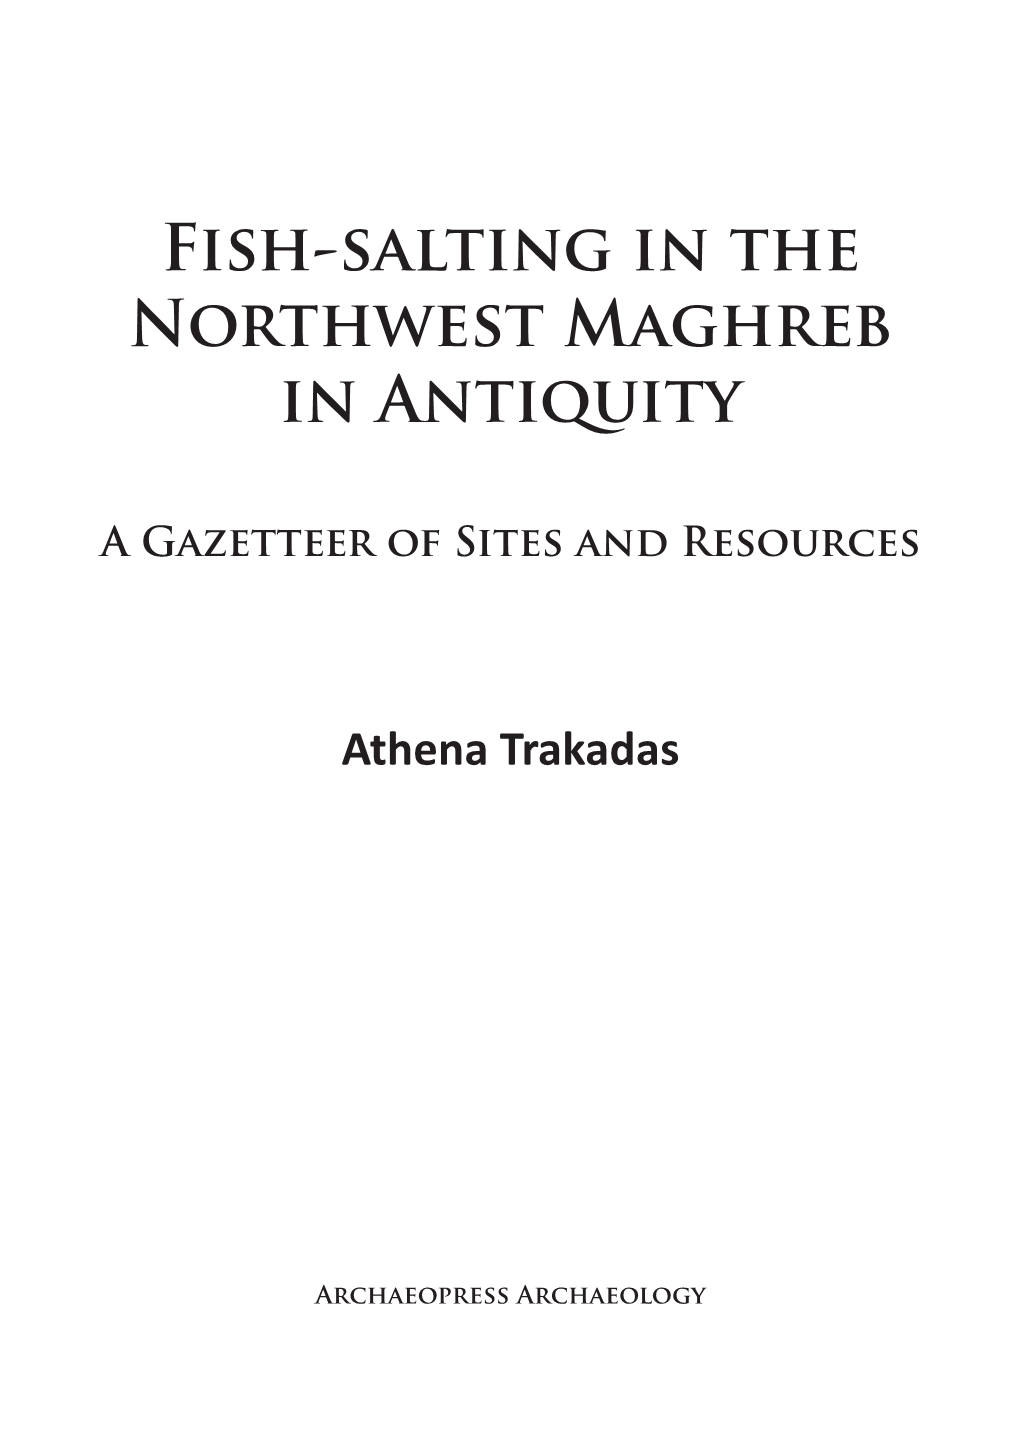 Fish-Salting in the Northwest Maghreb in Antiquity